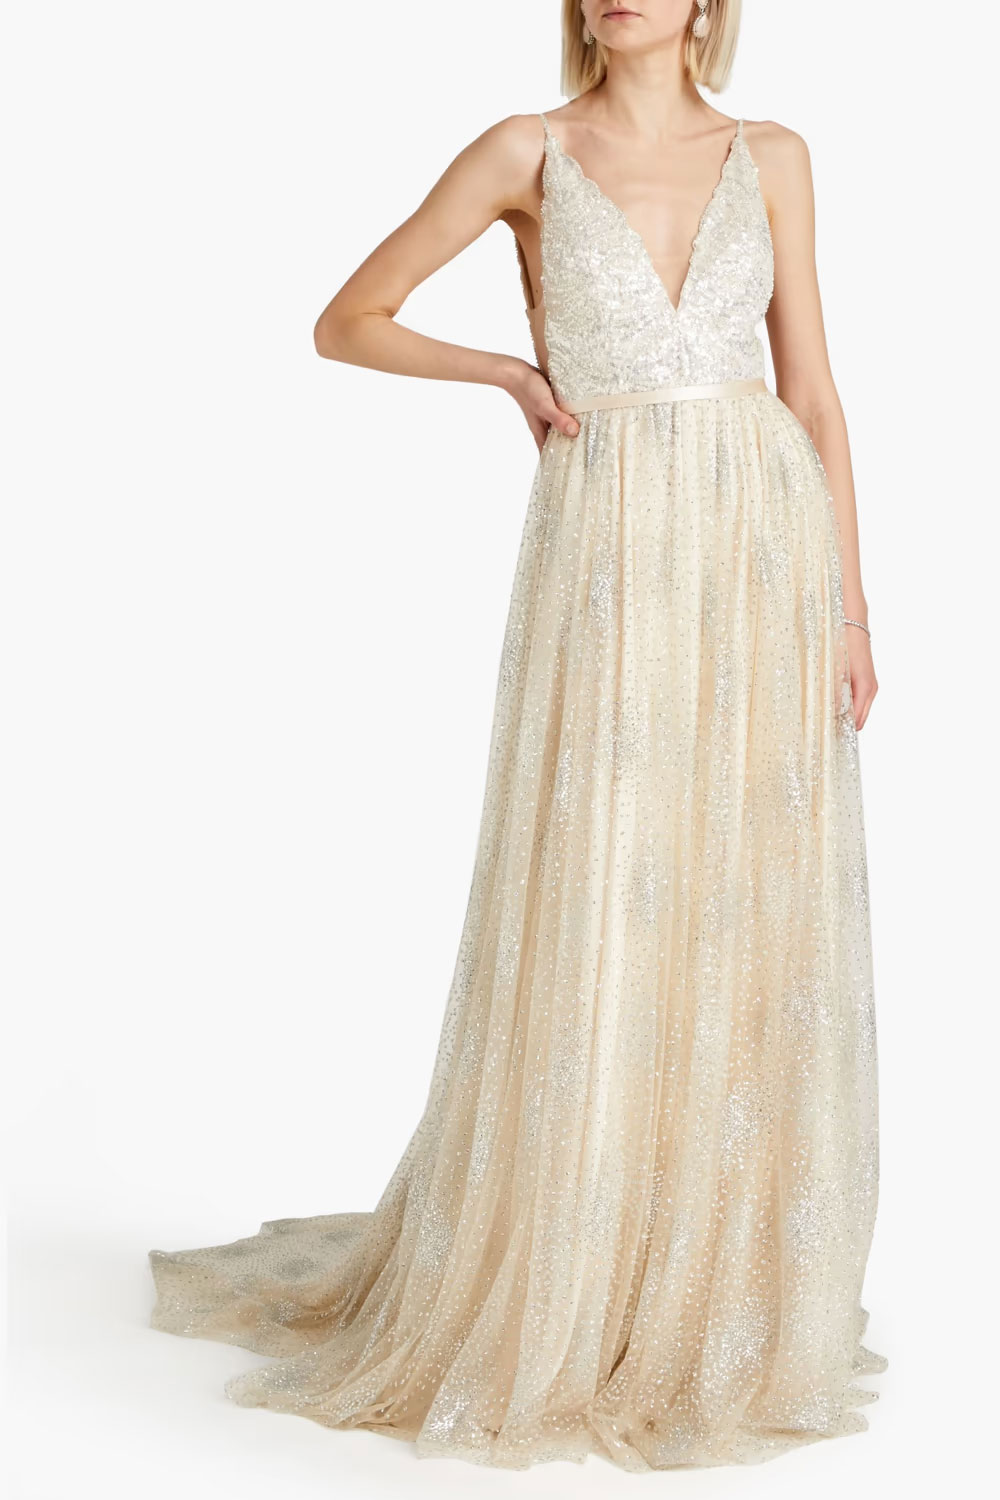 and Catherine Deane's Rumi embellished glittered tulle bridal gown on sale at Outnet